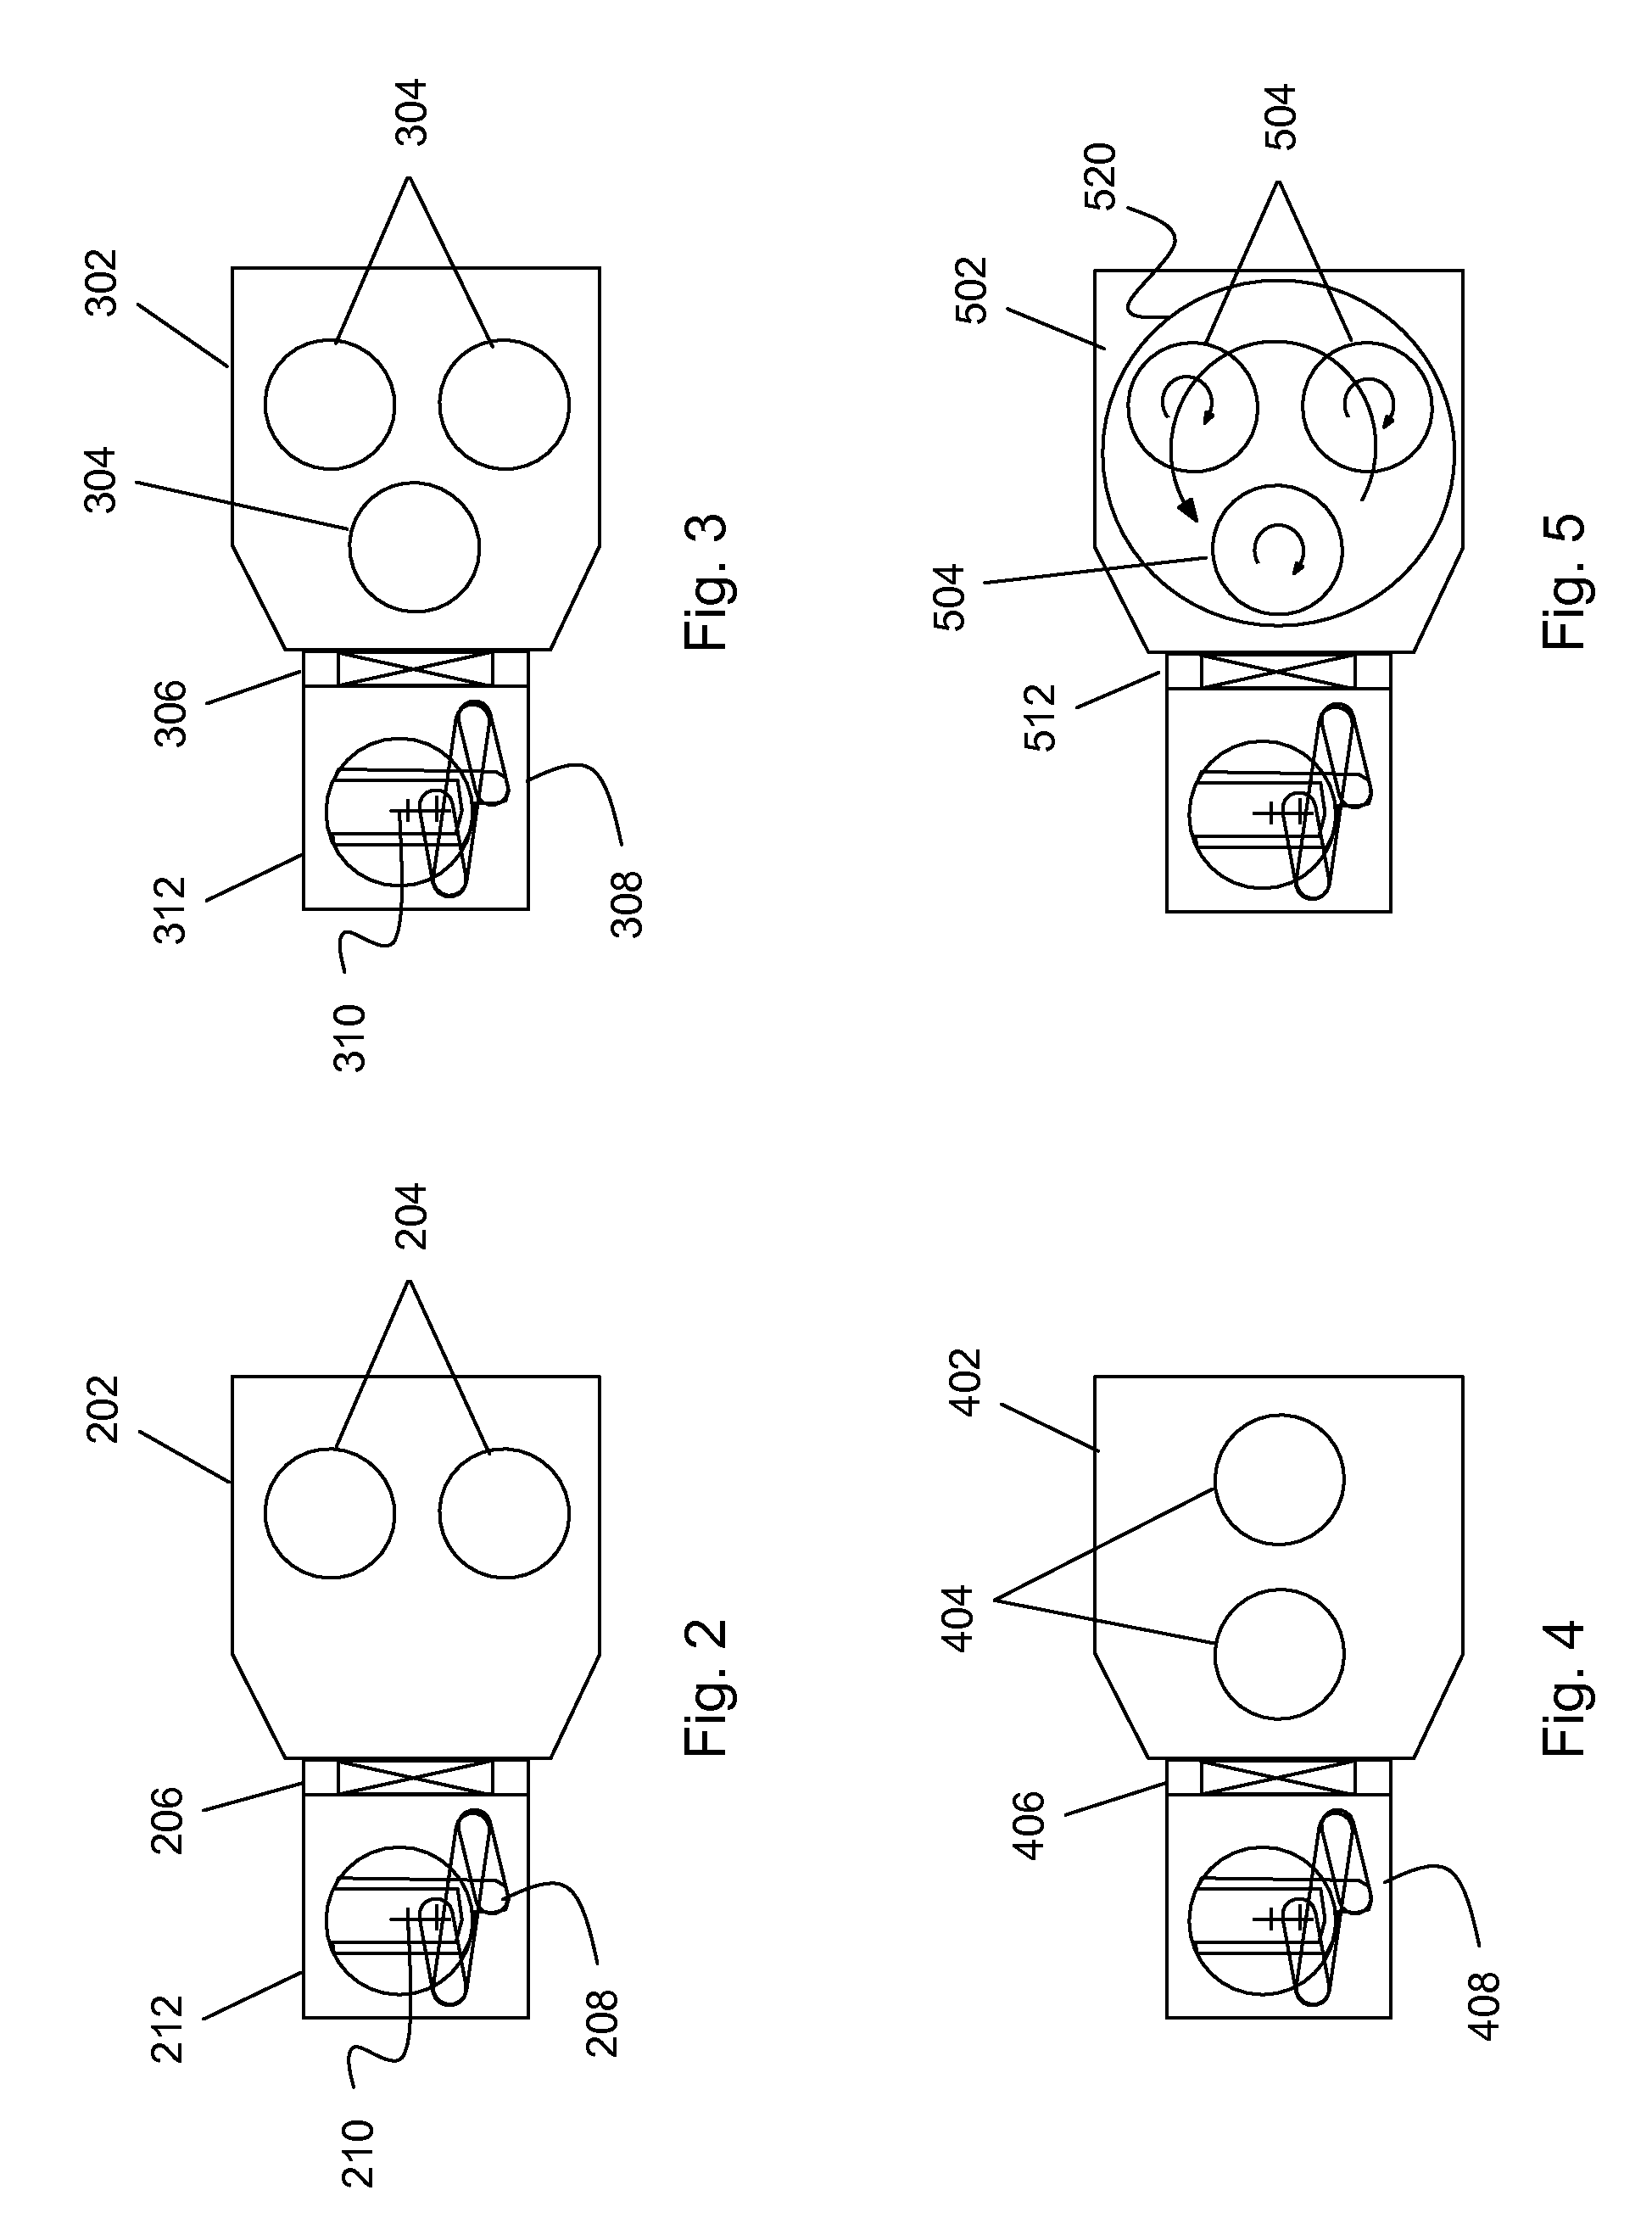 Semiconductor manufacturing process modules